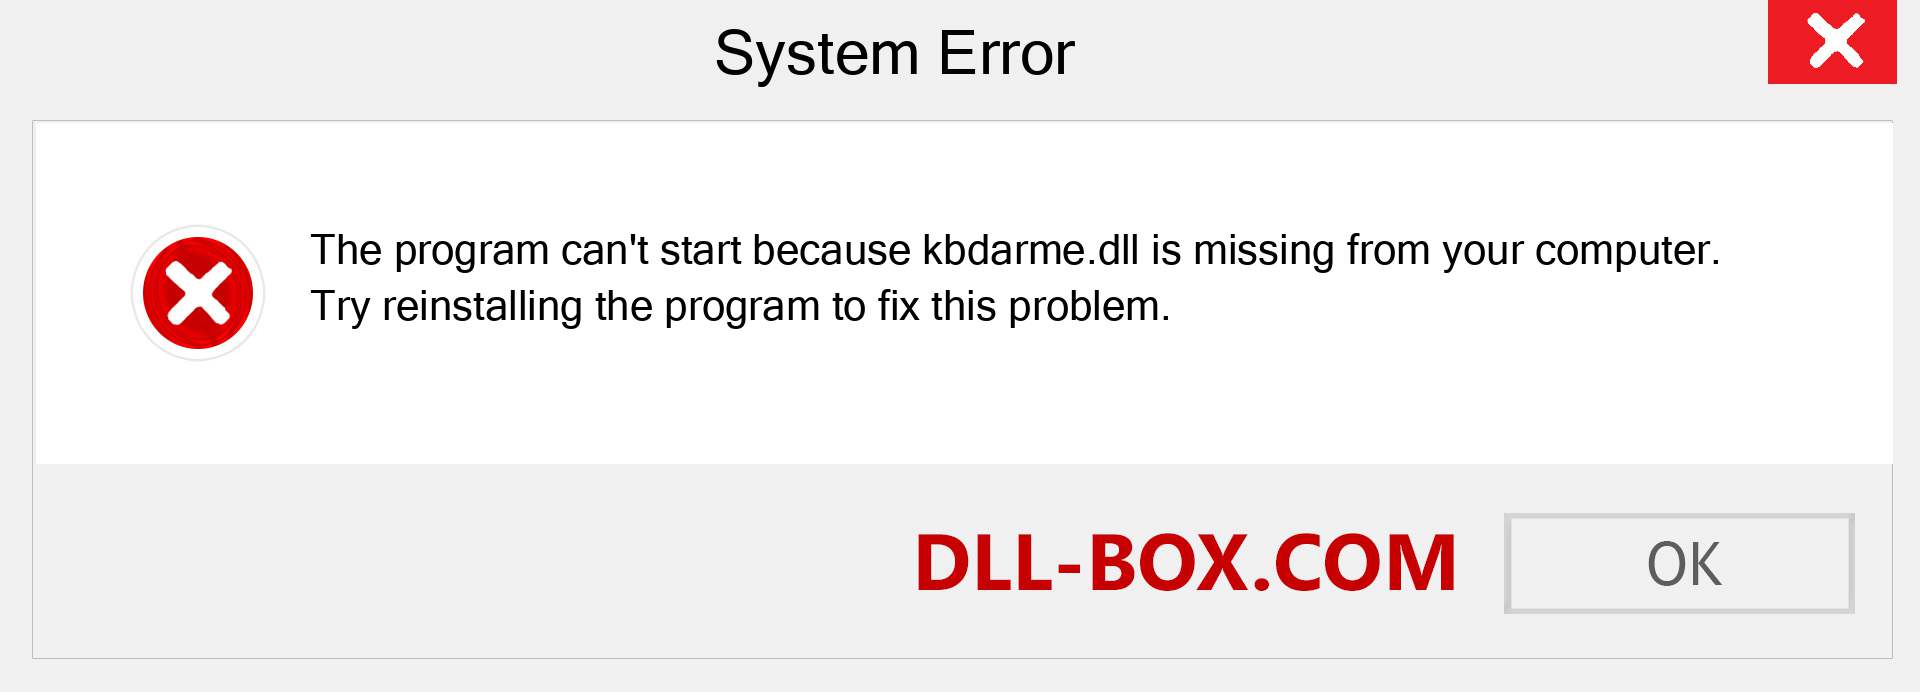  kbdarme.dll file is missing?. Download for Windows 7, 8, 10 - Fix  kbdarme dll Missing Error on Windows, photos, images